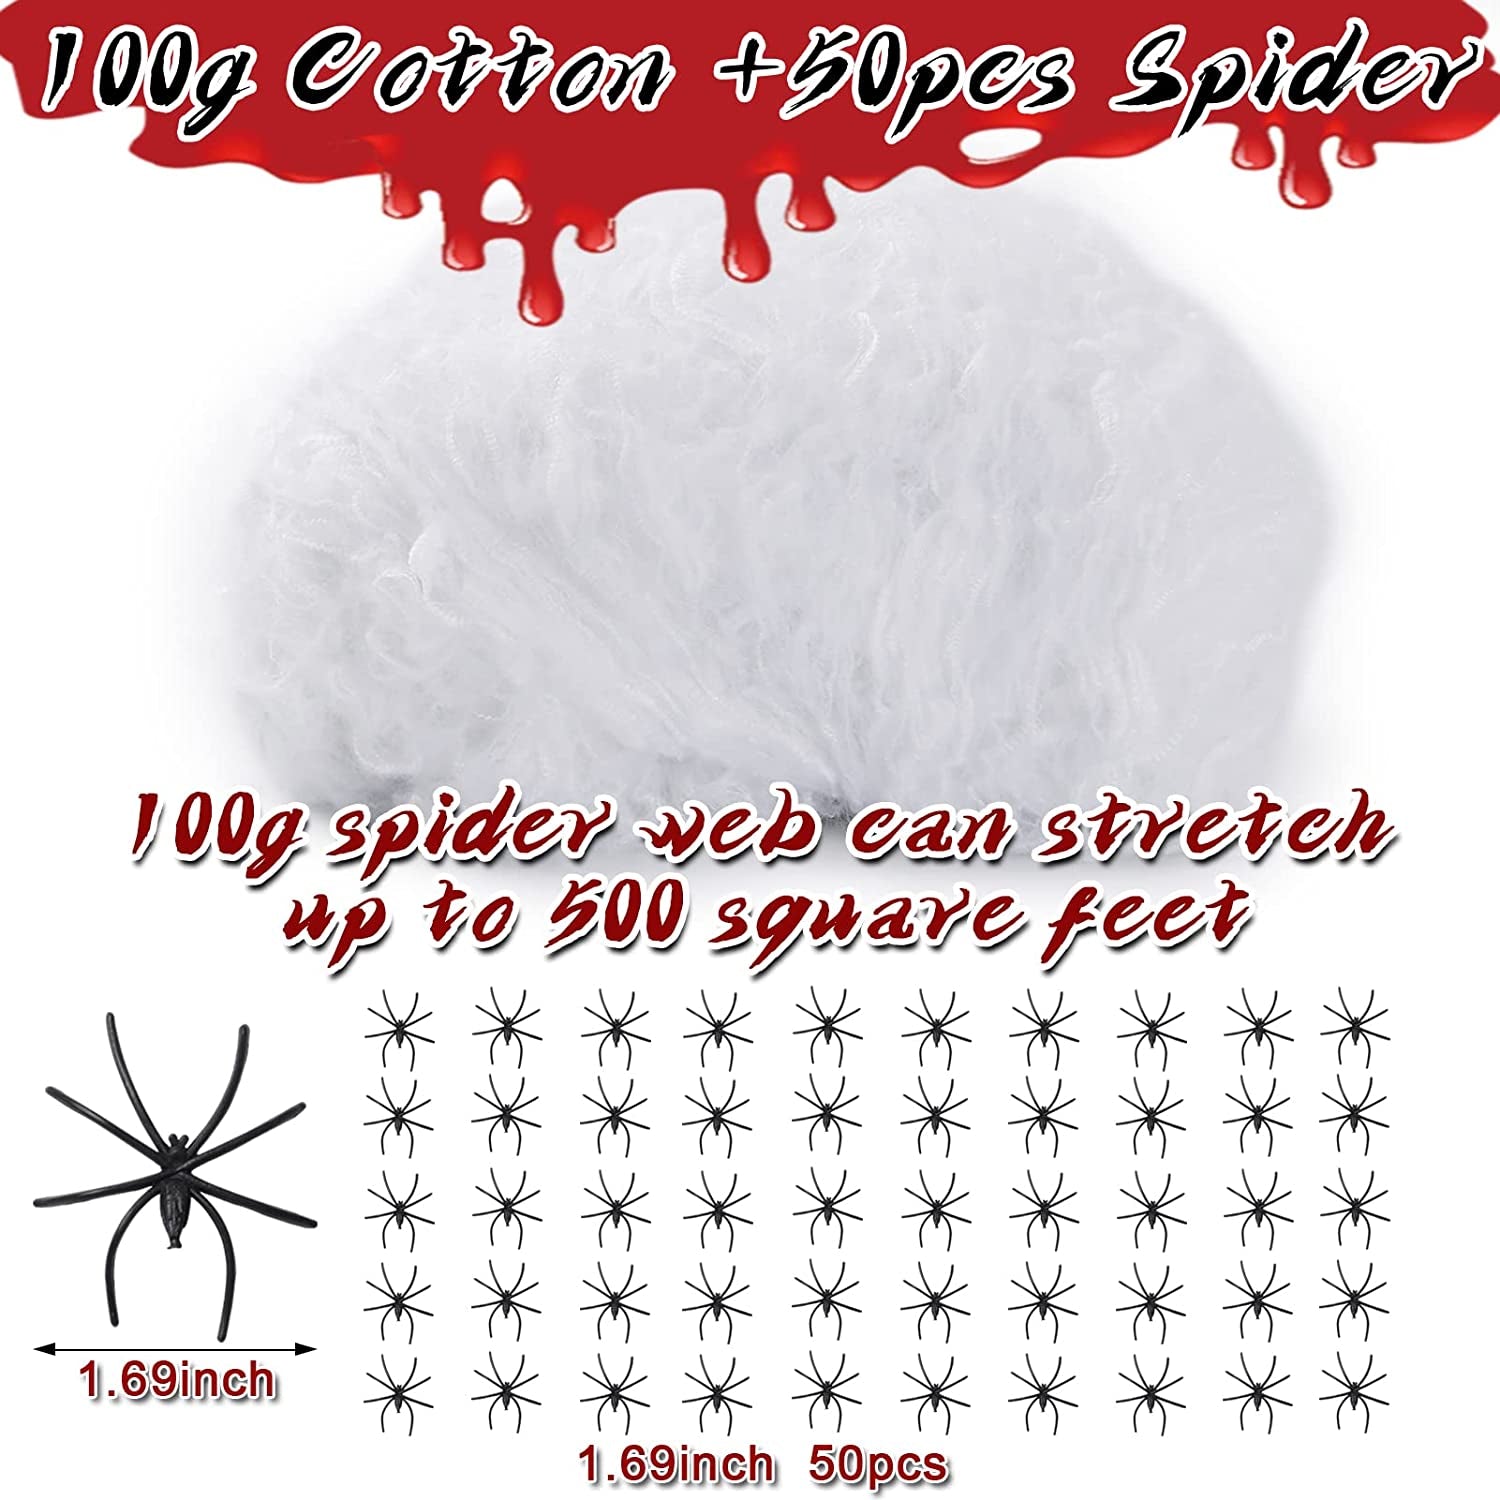 100G Halloween Spider Web Decoration, 50 Pcs Spiders Stretchable Stretch Cobweb for Halloween Haunted House Decor Scary Scence Party Supplies